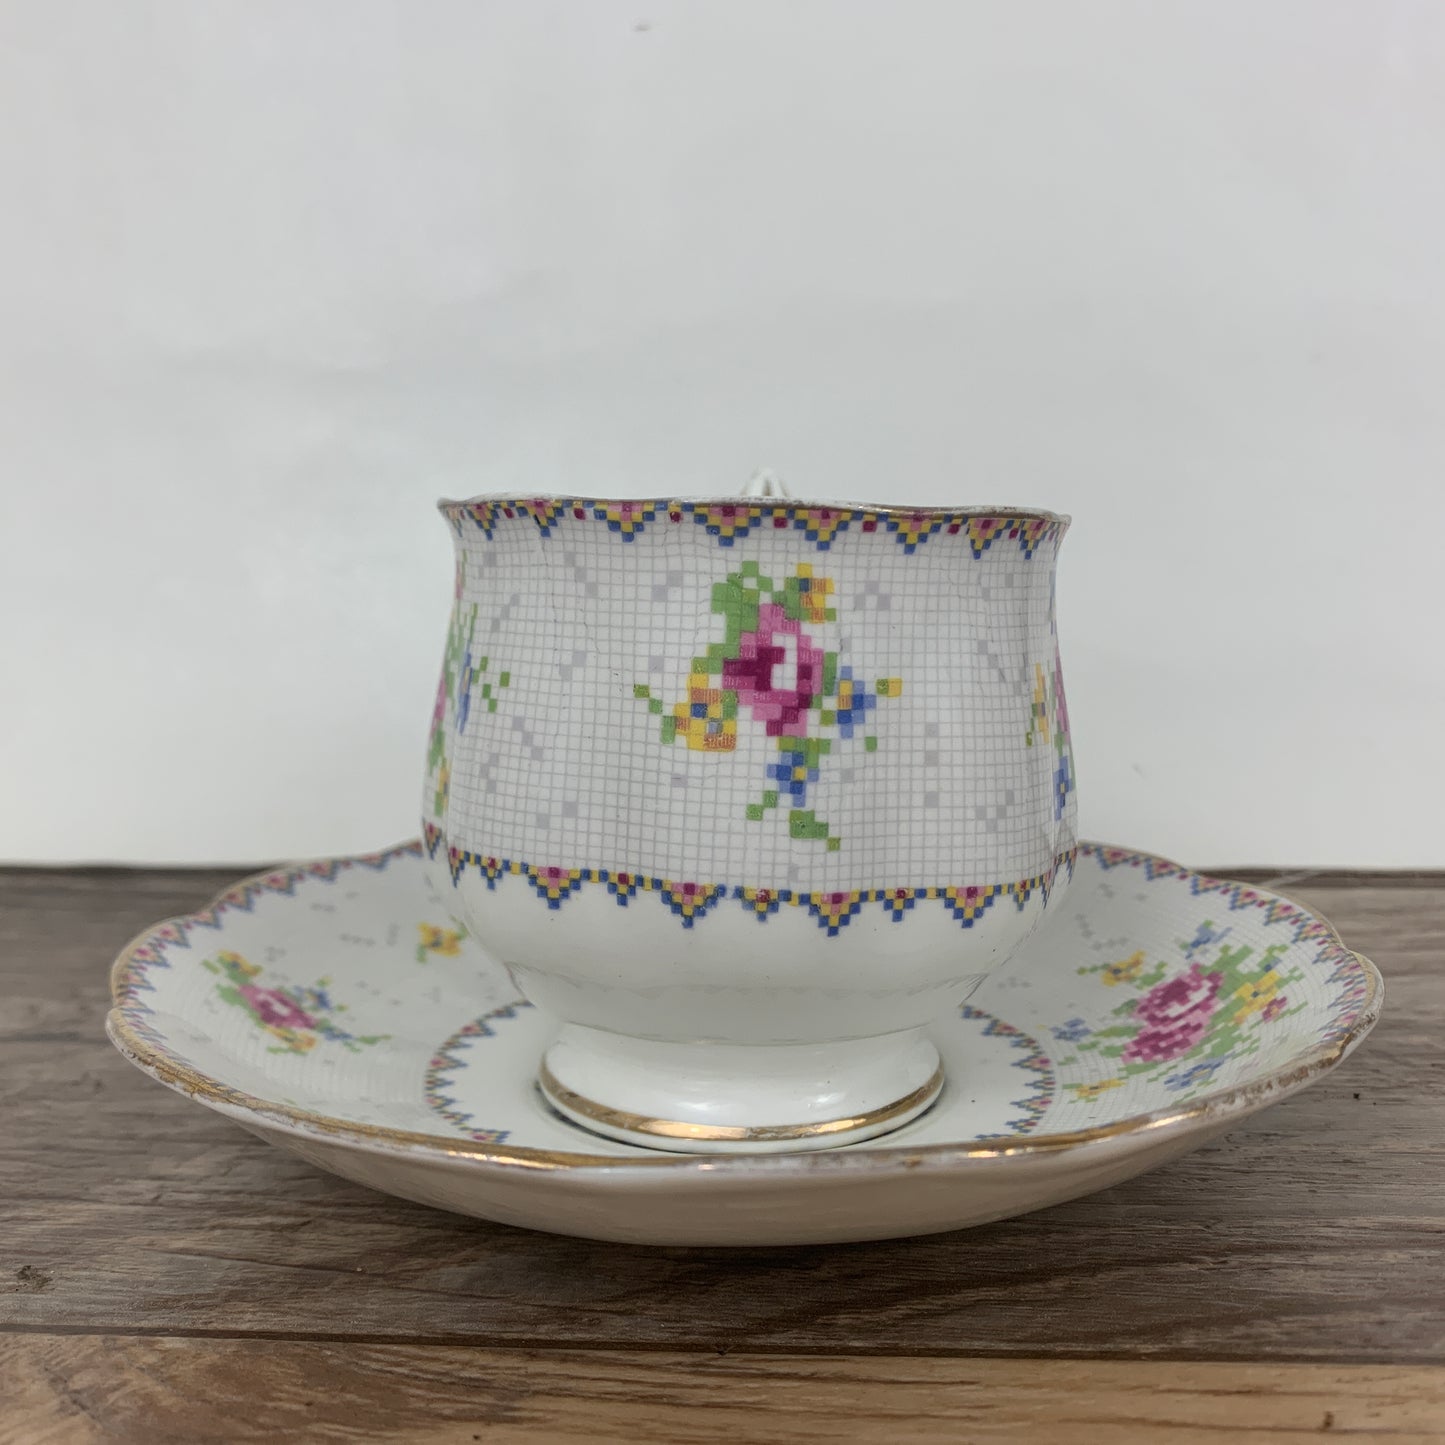 Royal Albert Petit Point Vintage Teacup and Saucer Made in England - Free Shipping